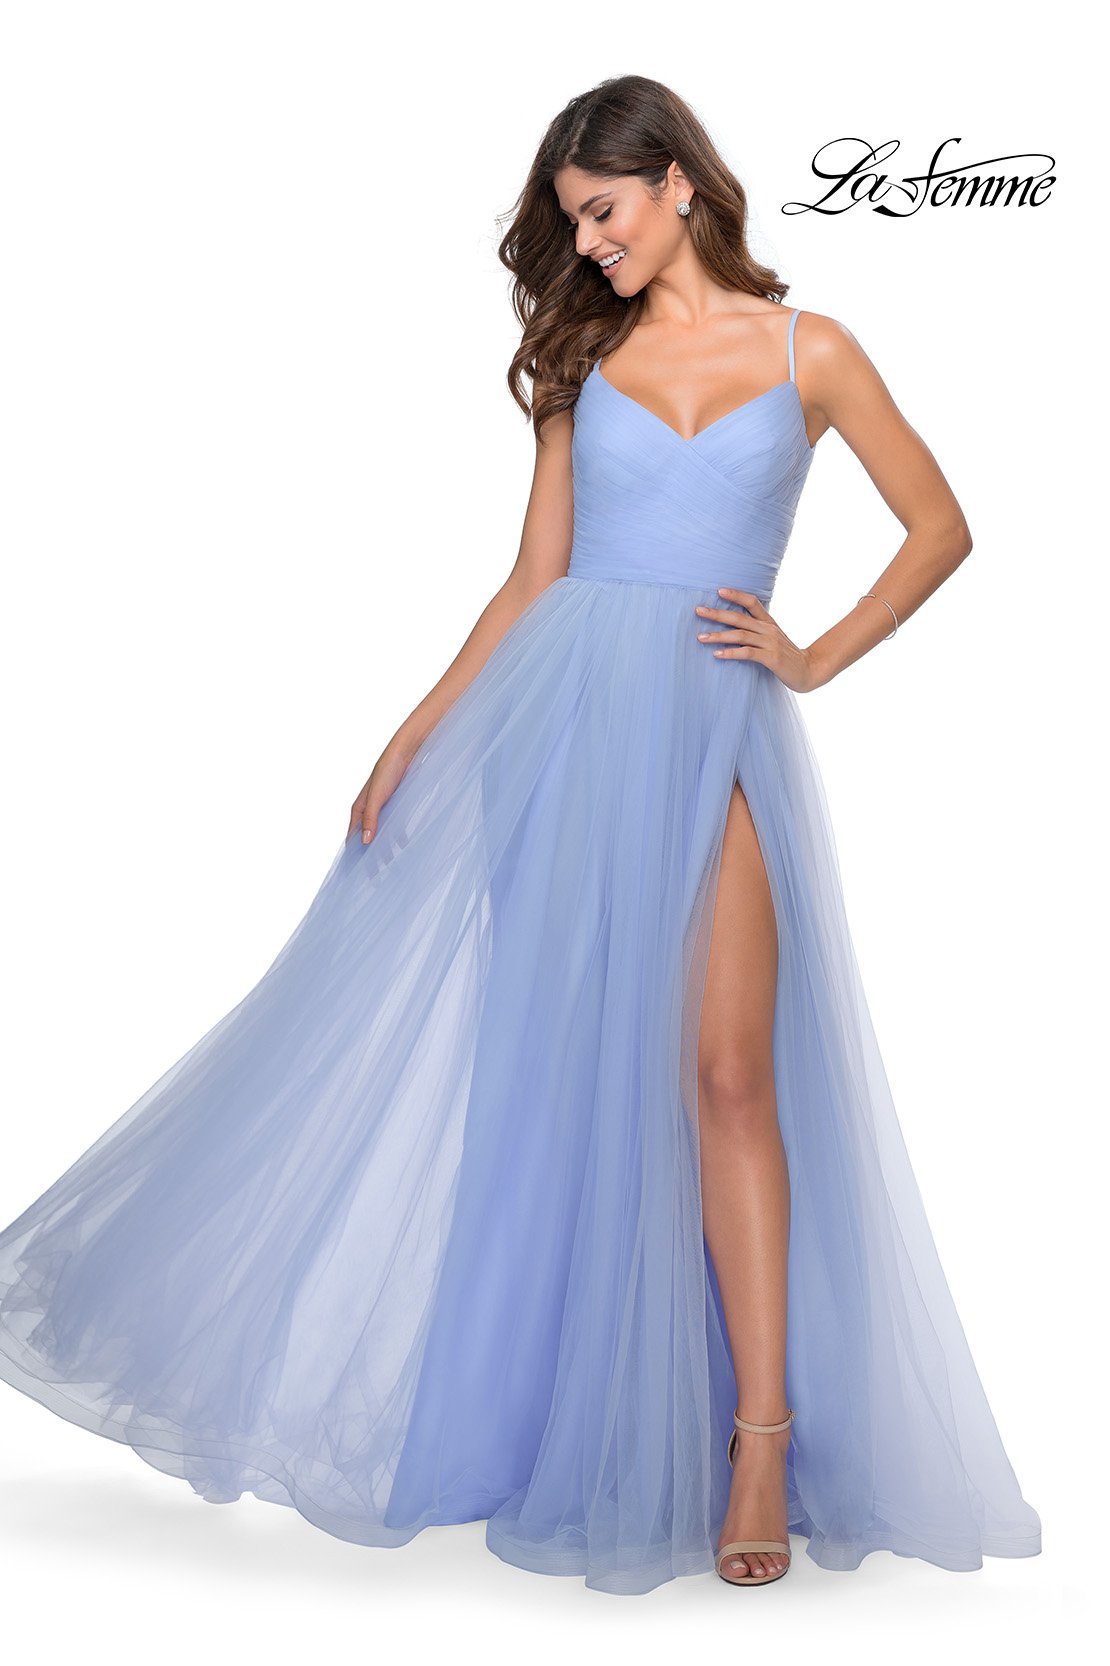 La Femme 28123 dress images in these colors: Black, Electric Blue, Lilac Mist, Neon Pink, Red.